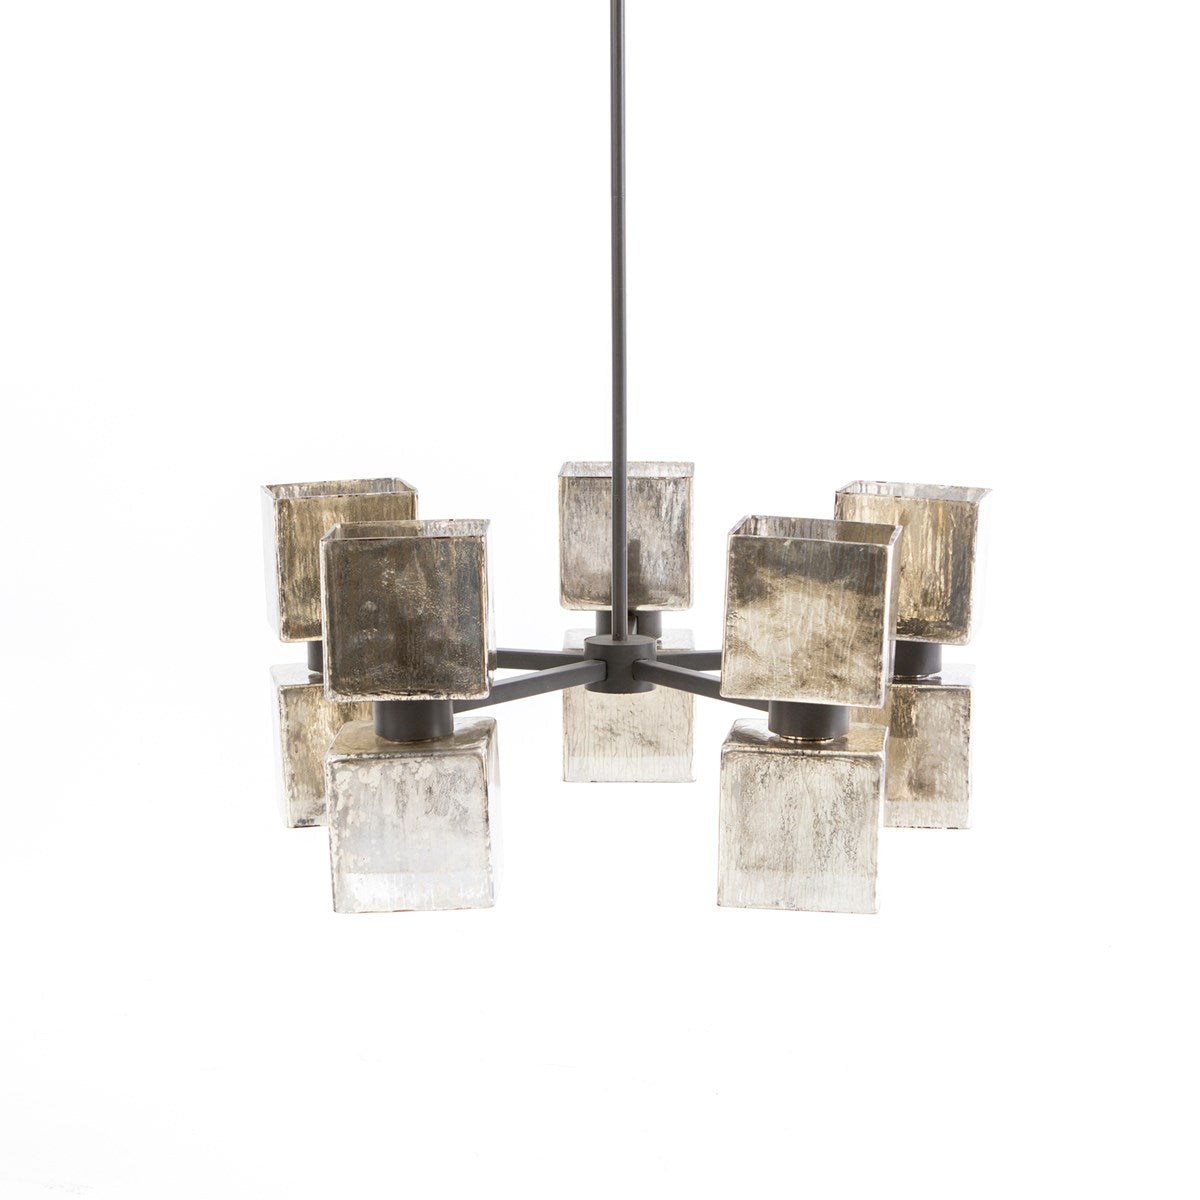 Load image into Gallery viewer, Ava Large Chandelier-Aged Metallic Glass Chandelier Four Hands     Four Hands, Burke Decor, Mid Century Modern Furniture, Old Bones Furniture Company, Old Bones Co, Modern Mid Century, Designer Furniture, https://www.oldbonesco.com/
